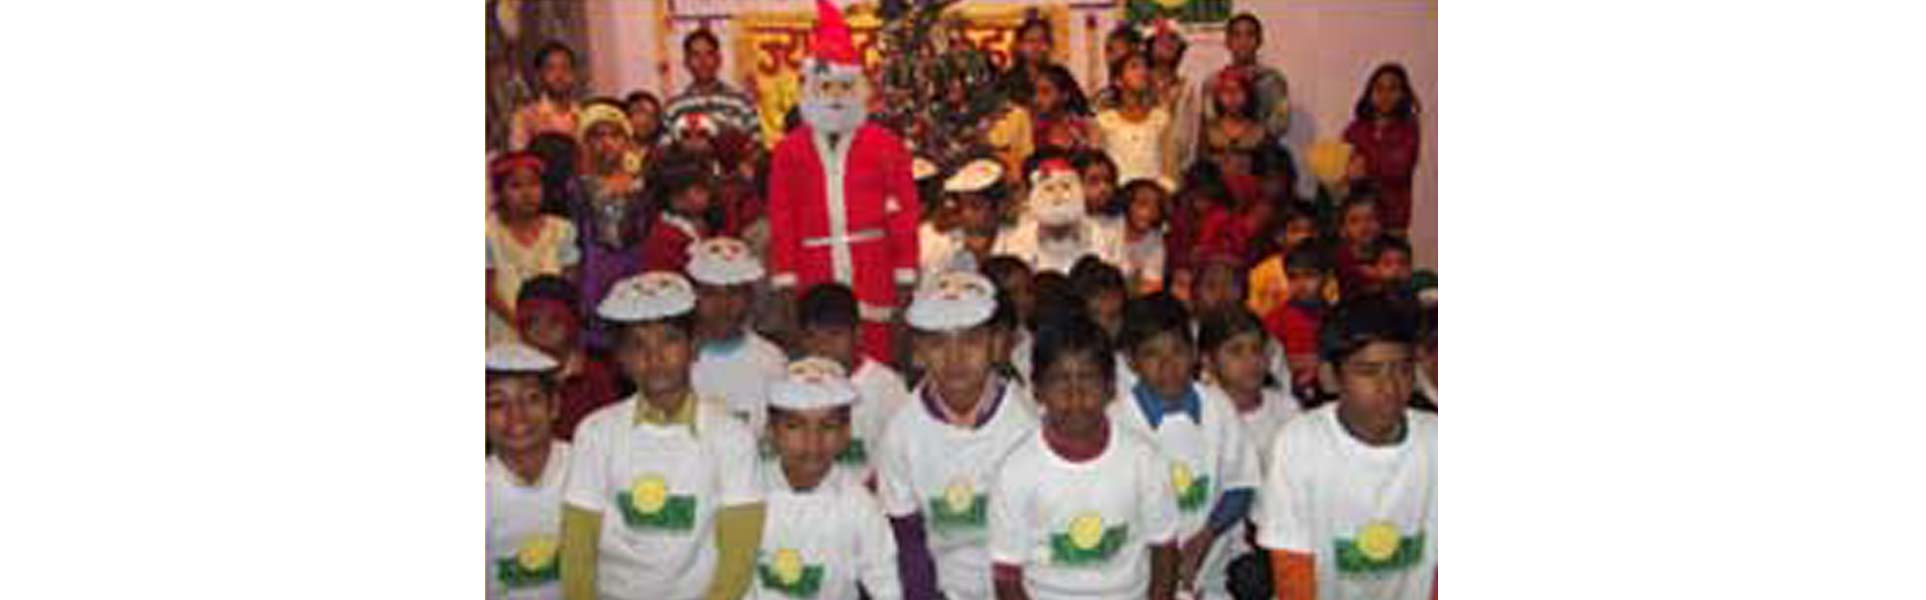 Smile kids sing and dance in the festival of Christmas